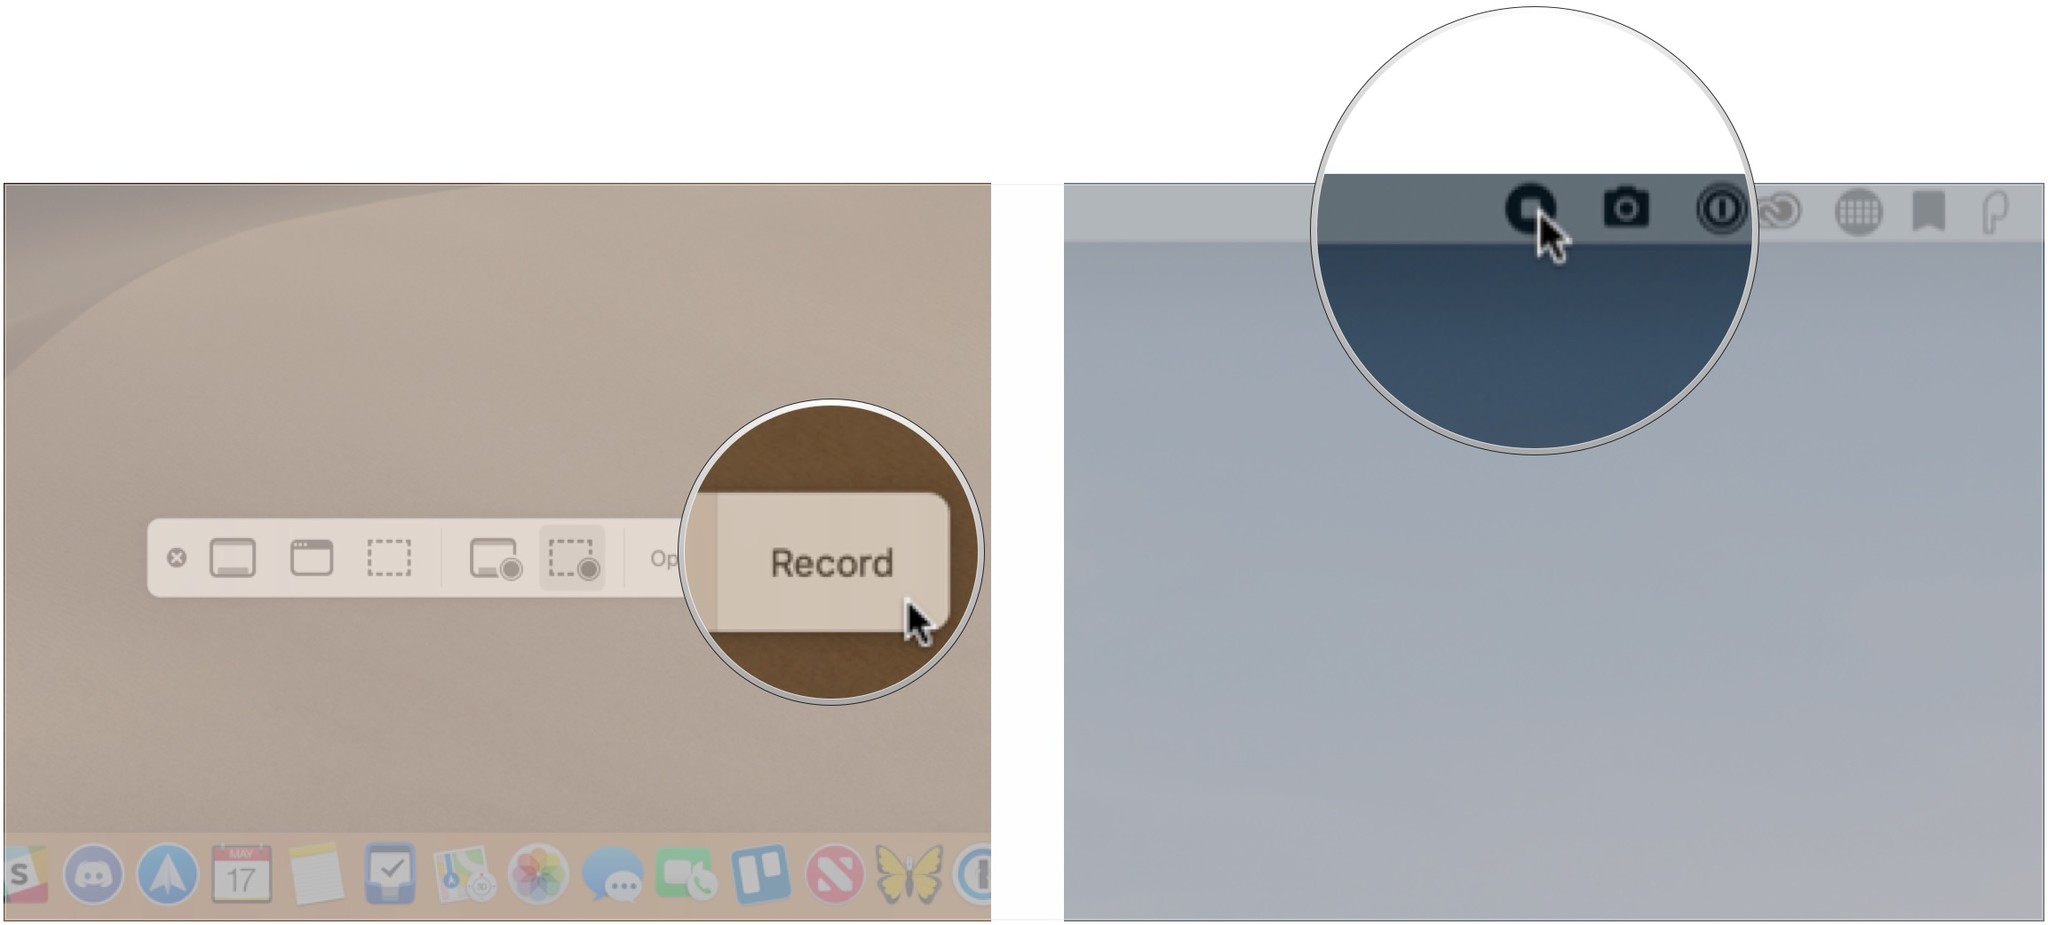 To record your screen on Mac, click Record, press Stop button when done